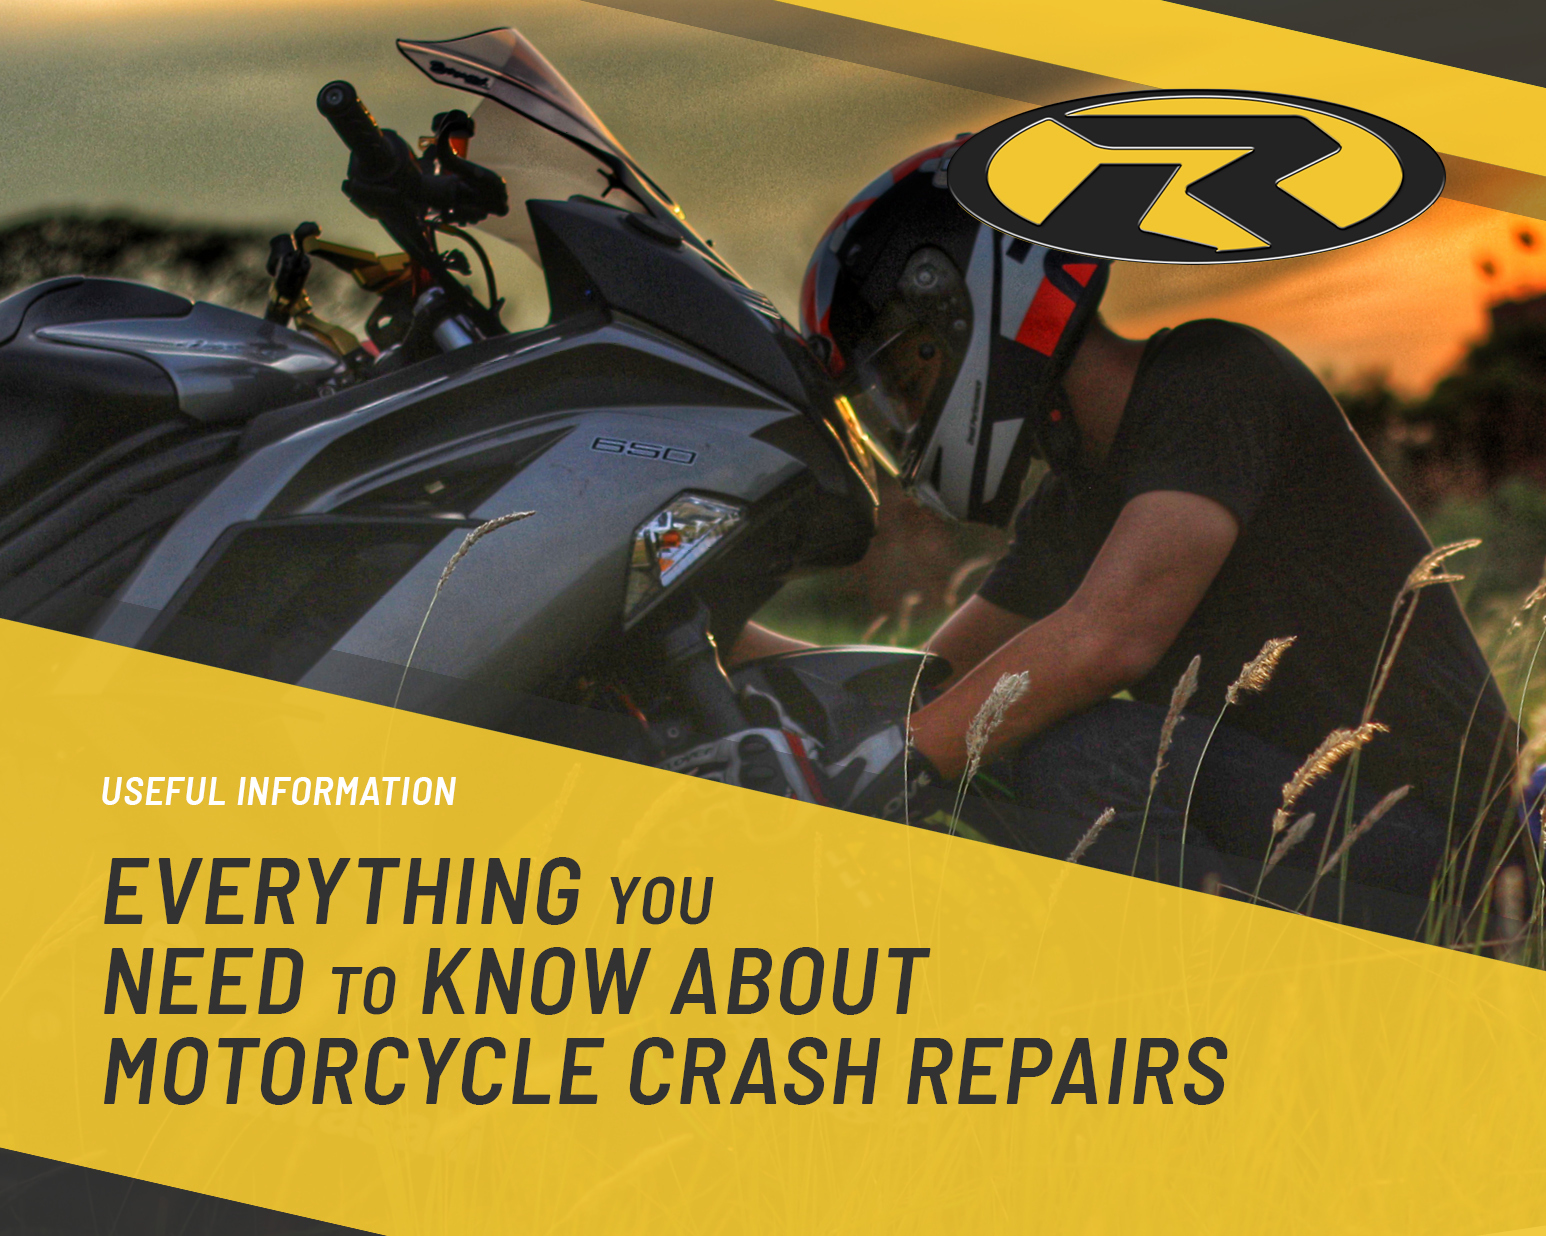 Everything You Need to Know about Motorcycle Crash Repairs